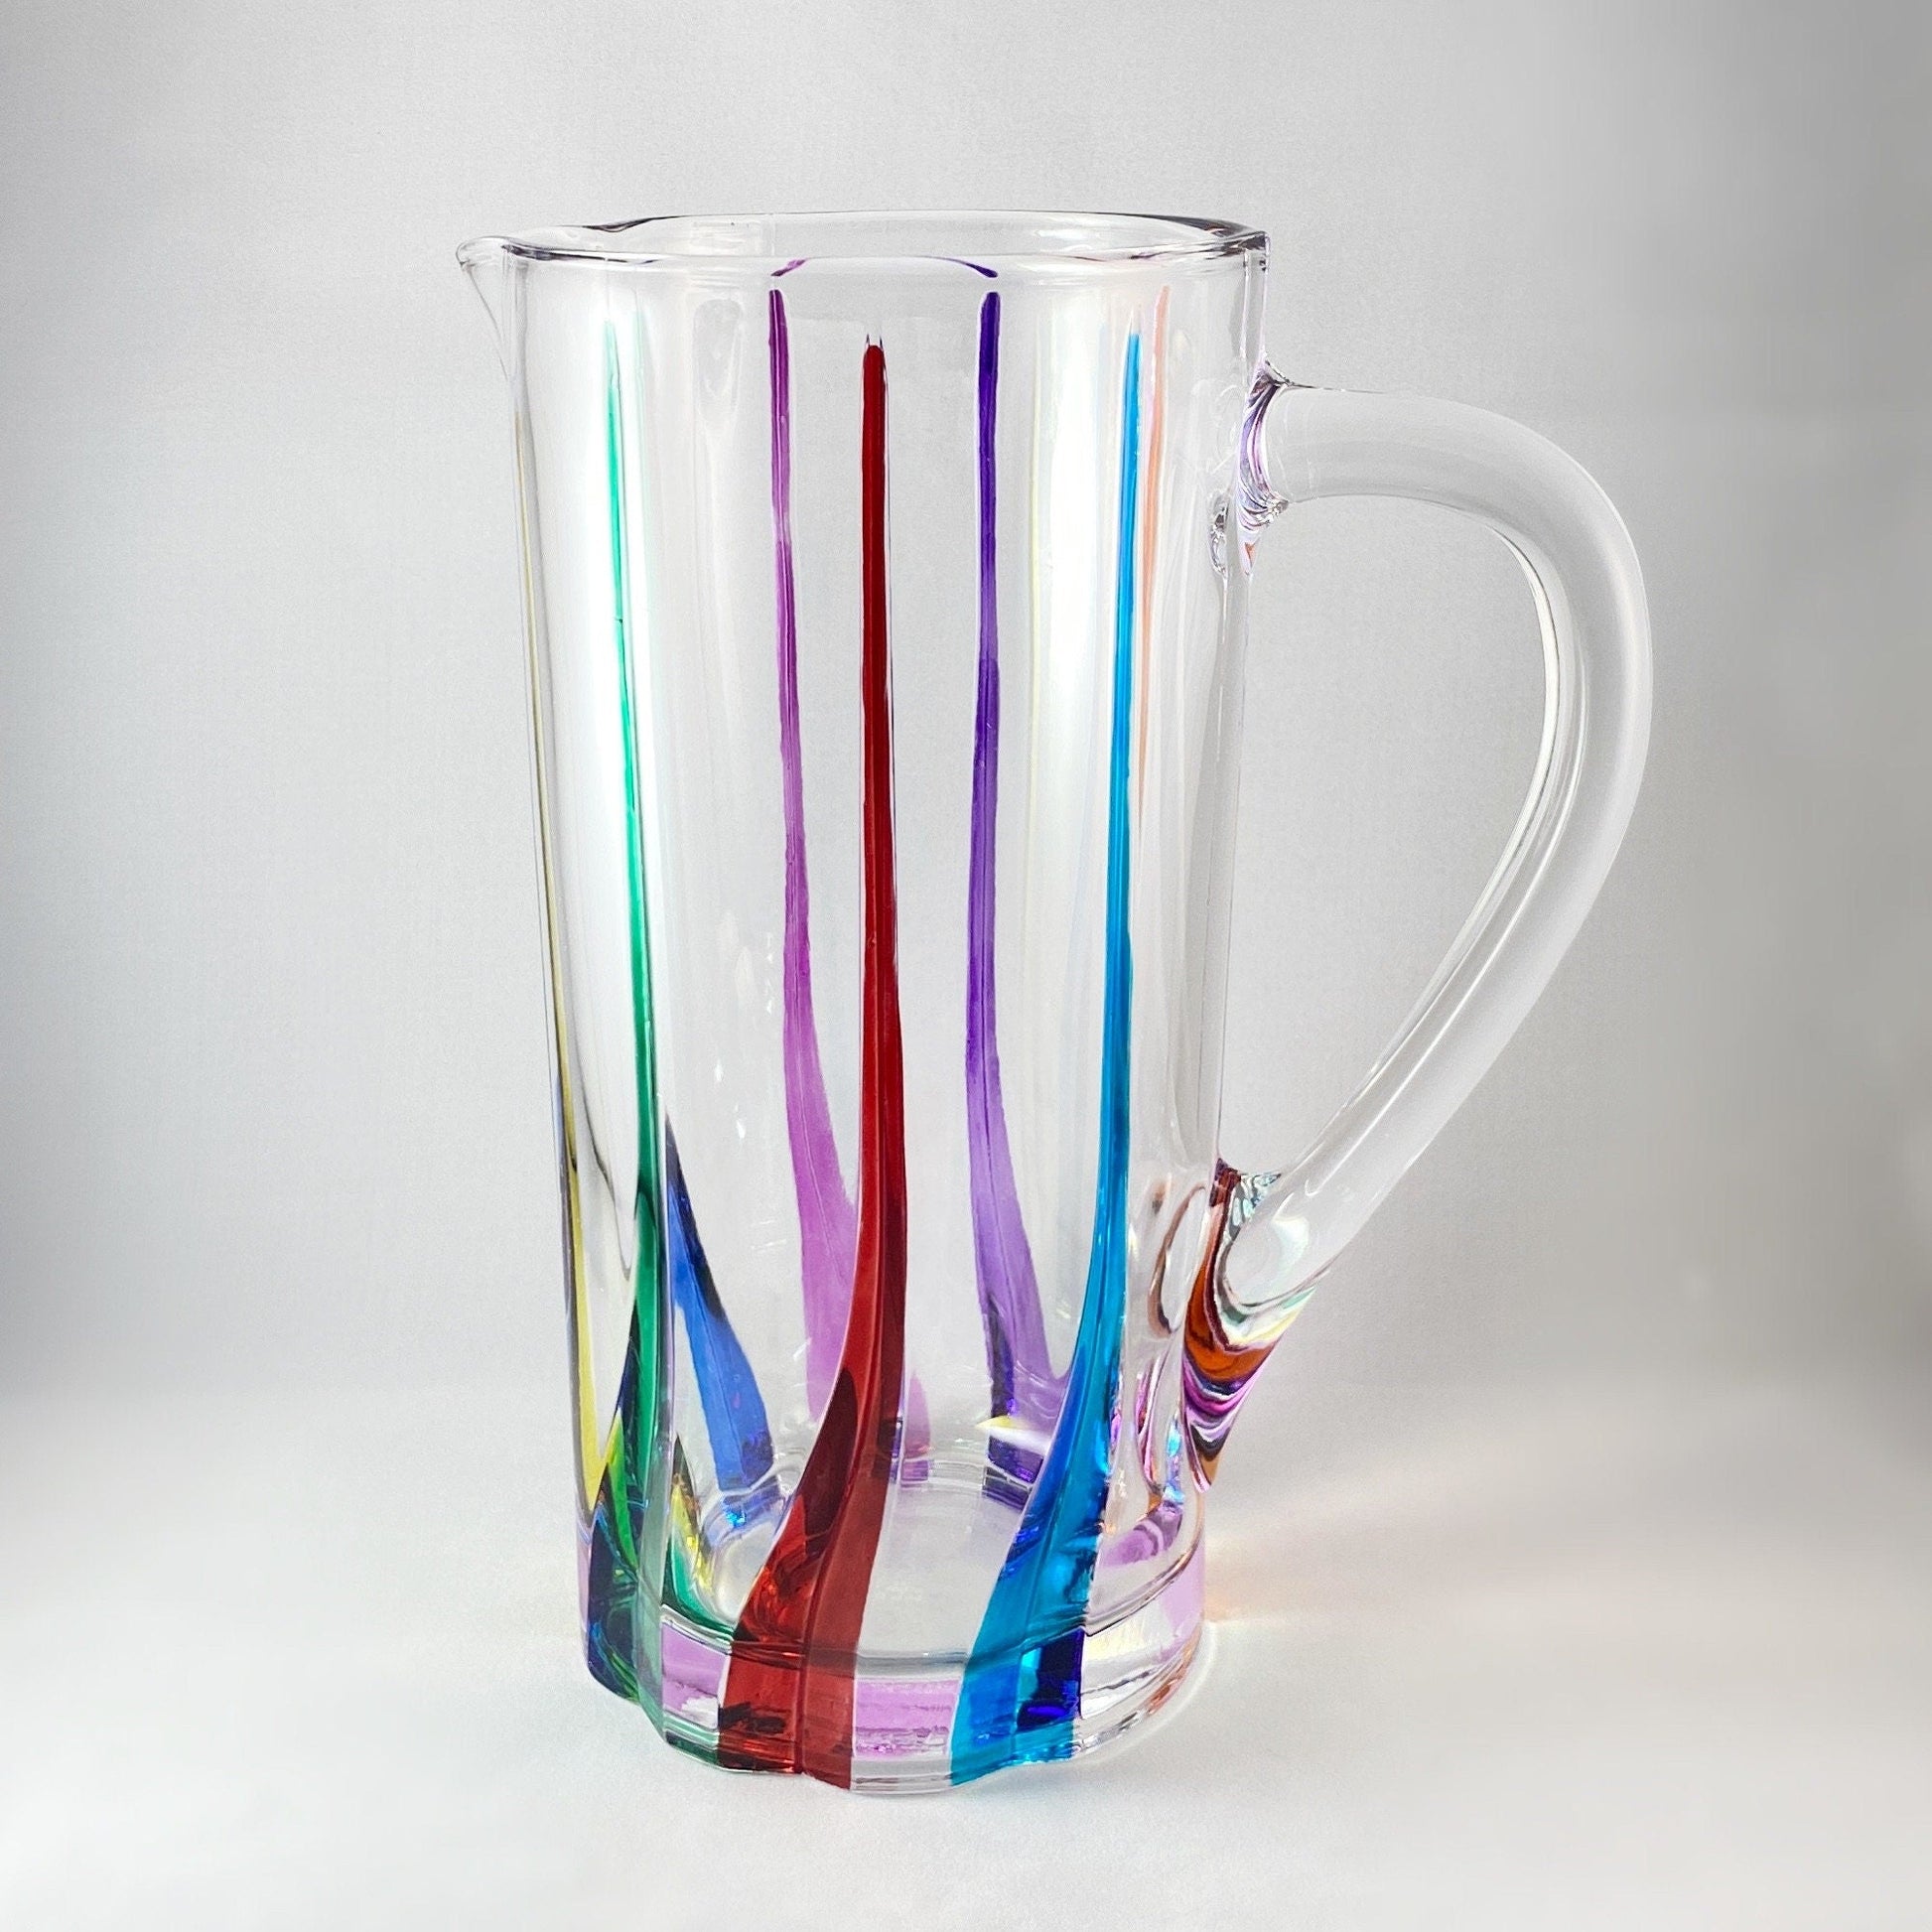 Venetian Glass Trix Pitcher - Handmade in Italy, Colorful Murano Glass Pitcher